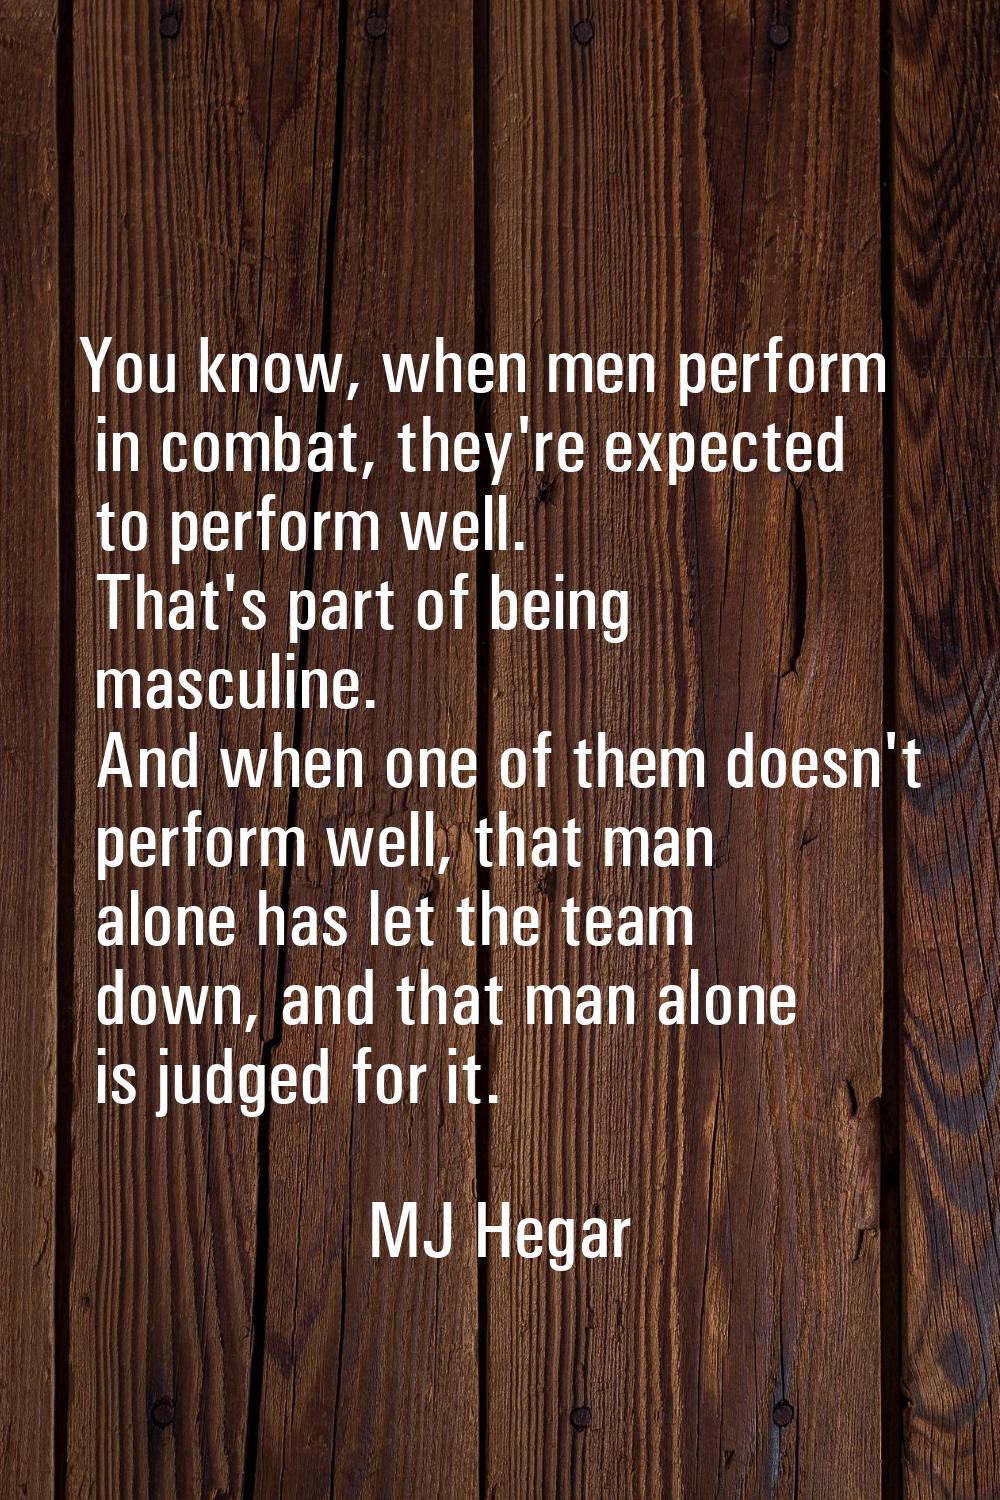 You know, when men perform in combat, they're expected to perform well. That's part of being mascul